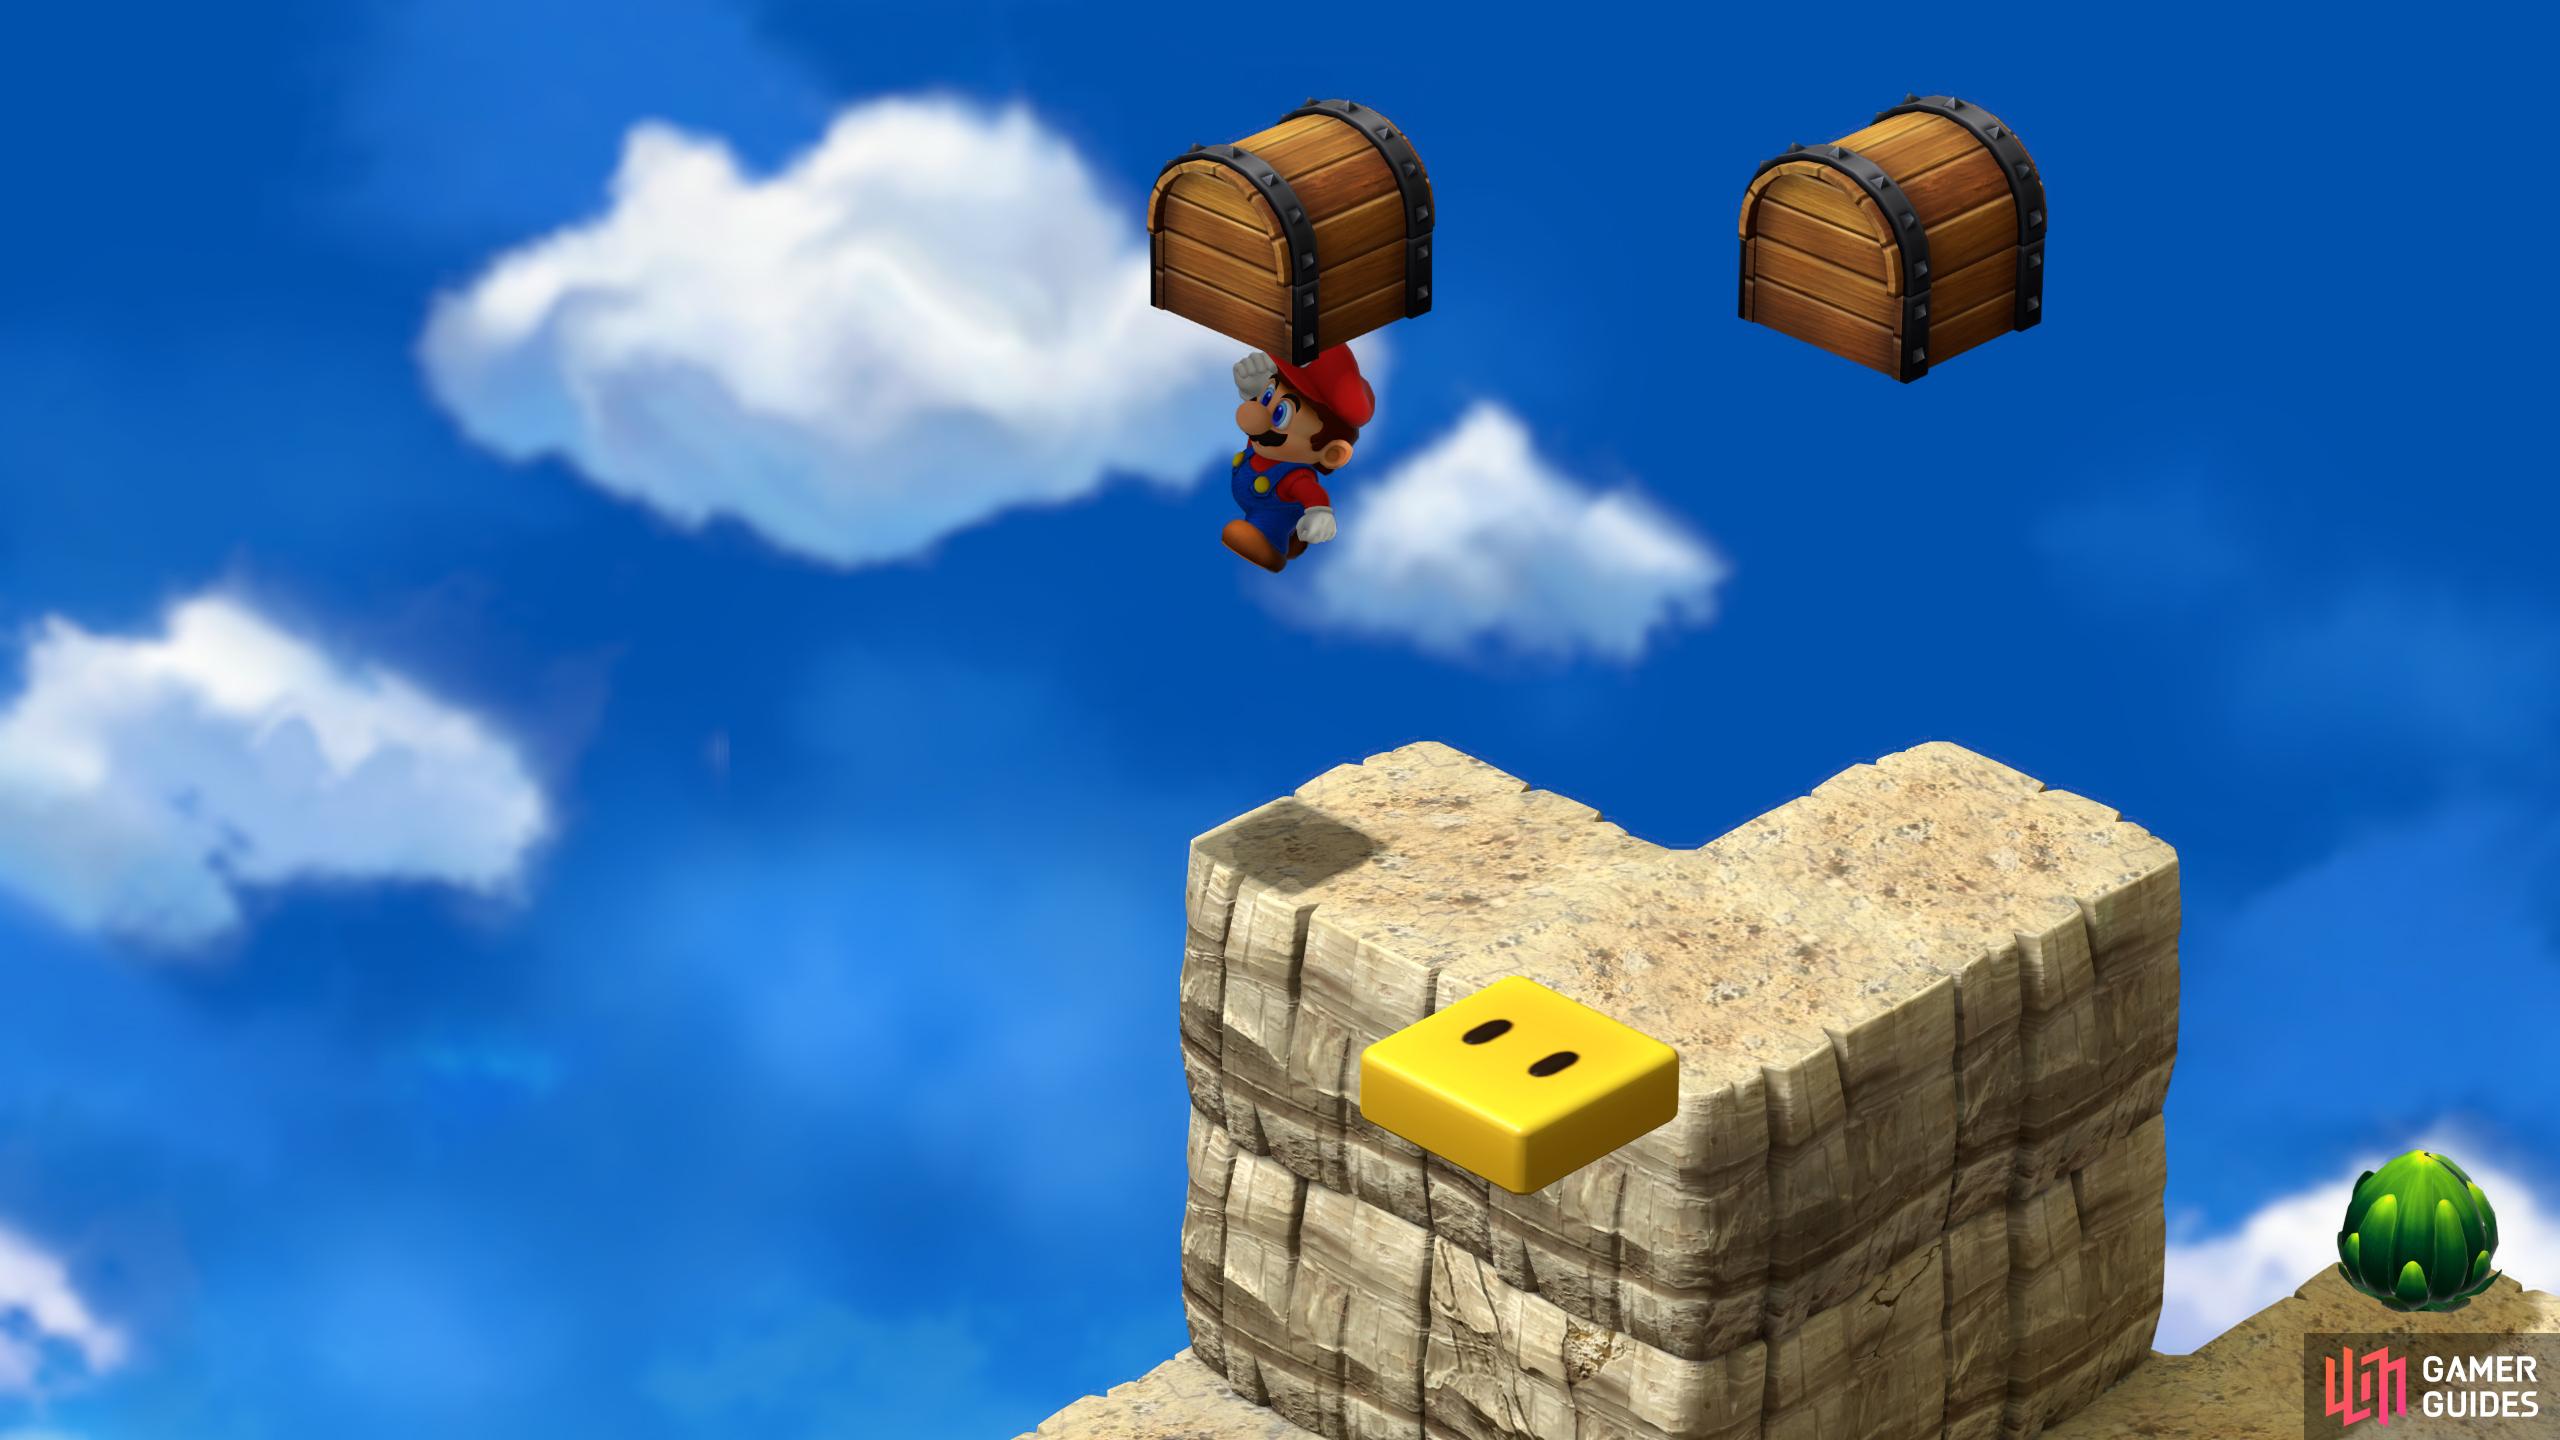 Hidden Treasure 2: You'll need to reveal the yellow platform first before using the cannon again to reach the highest ledge.